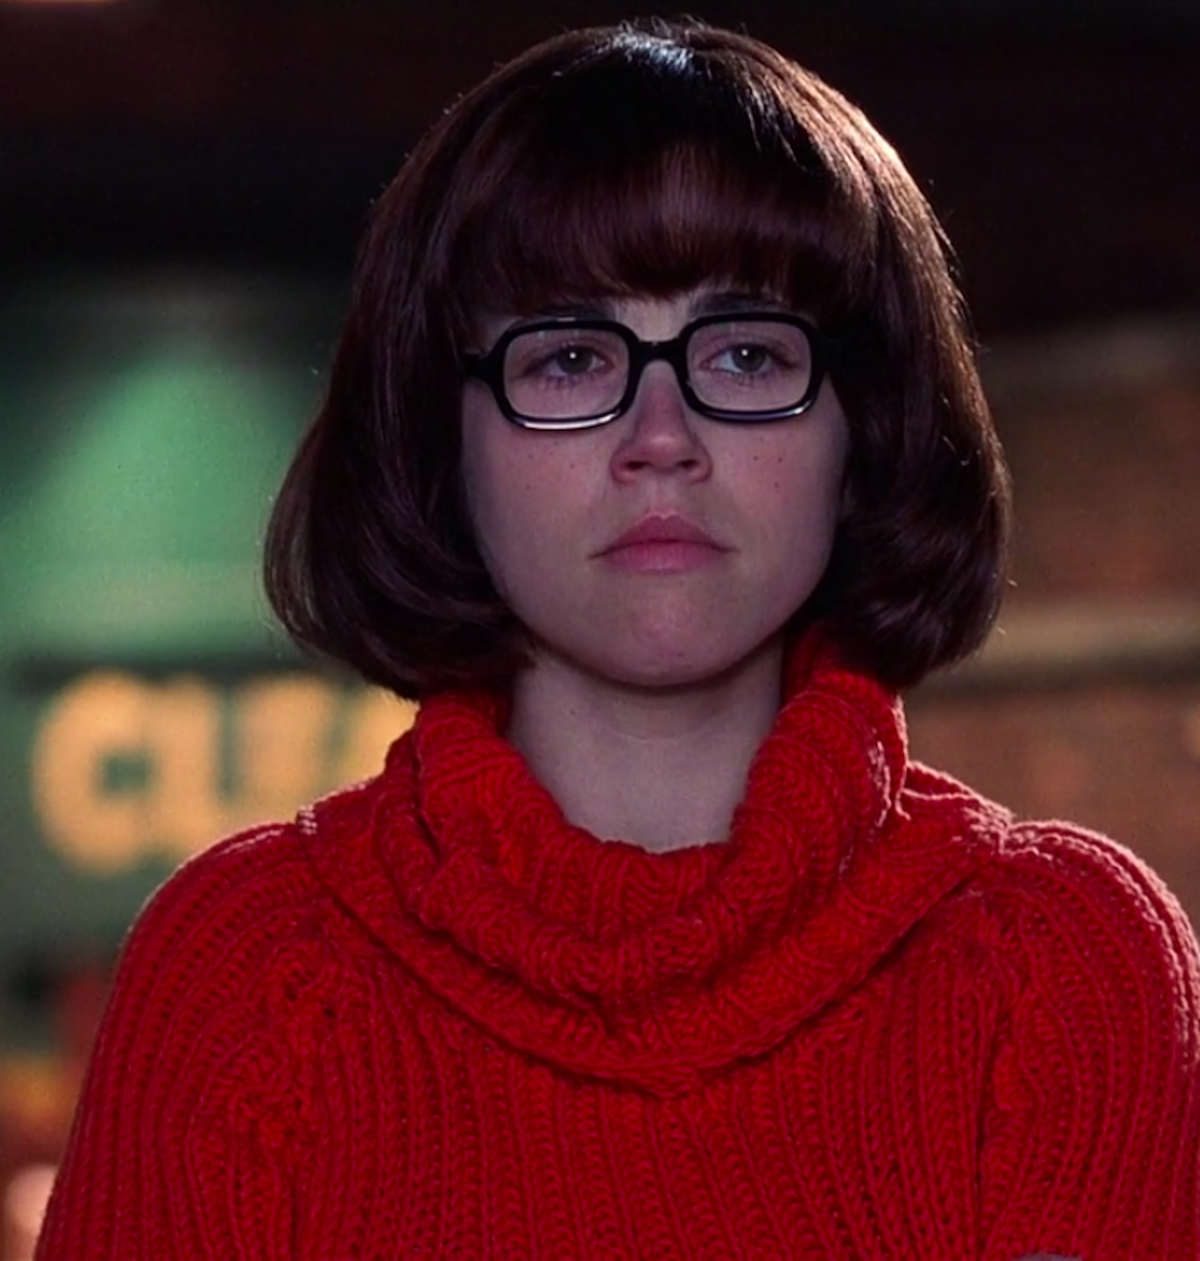 Miss Velma-Dace Dinkley via Her Live-Action Appearance | The Live ...